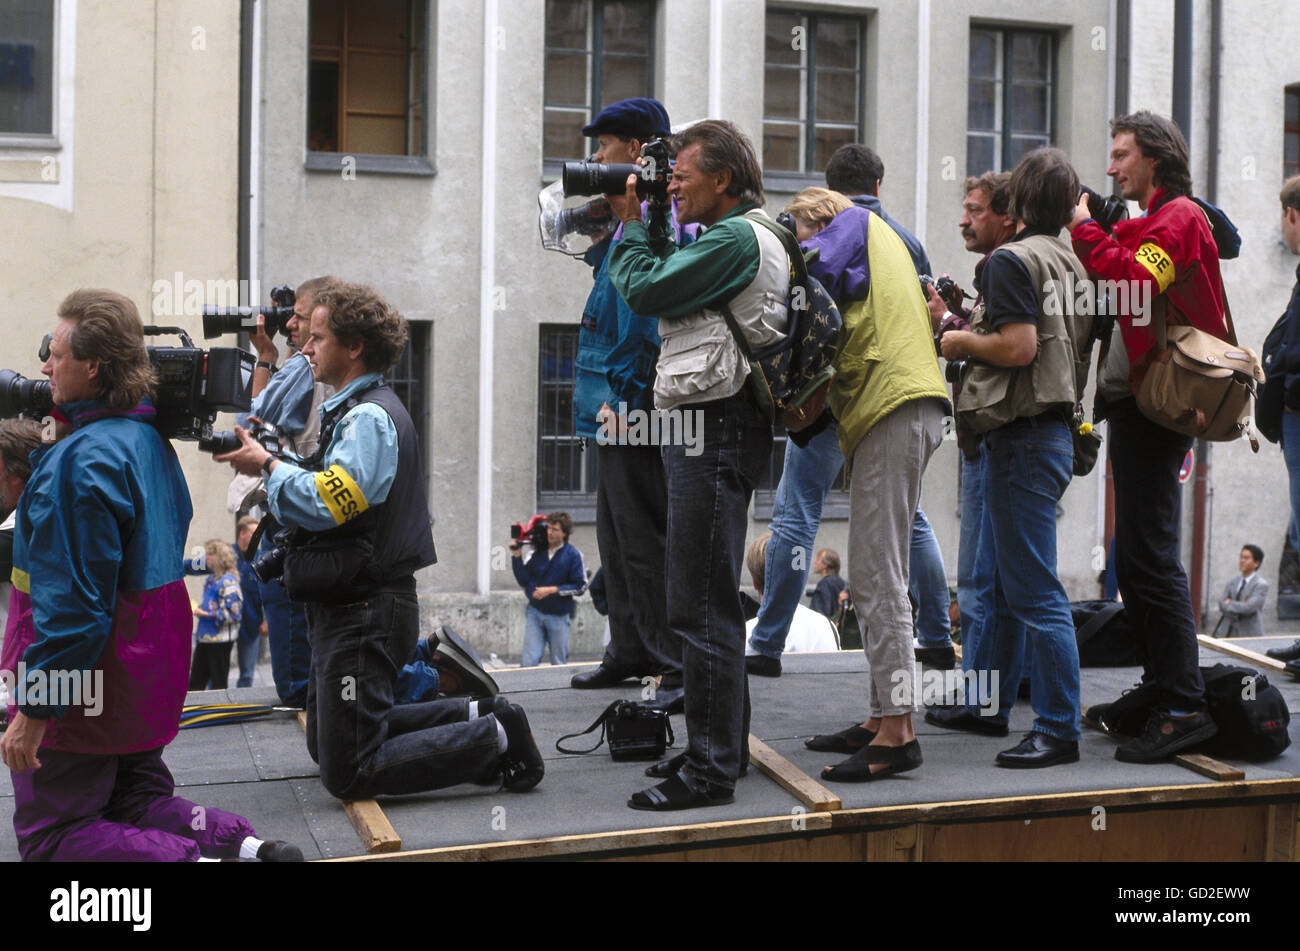 politics, conferences, G-7 summit, Munich, 6.- 8.7.1992, photographers on a pedestal 6.7.1992, journalists, press, G7 conference, people, Bavaria, Germany, 1990s, 90s, 20th century, historic, historical, Additional-Rights-Clearences-Not Available Stock Photo